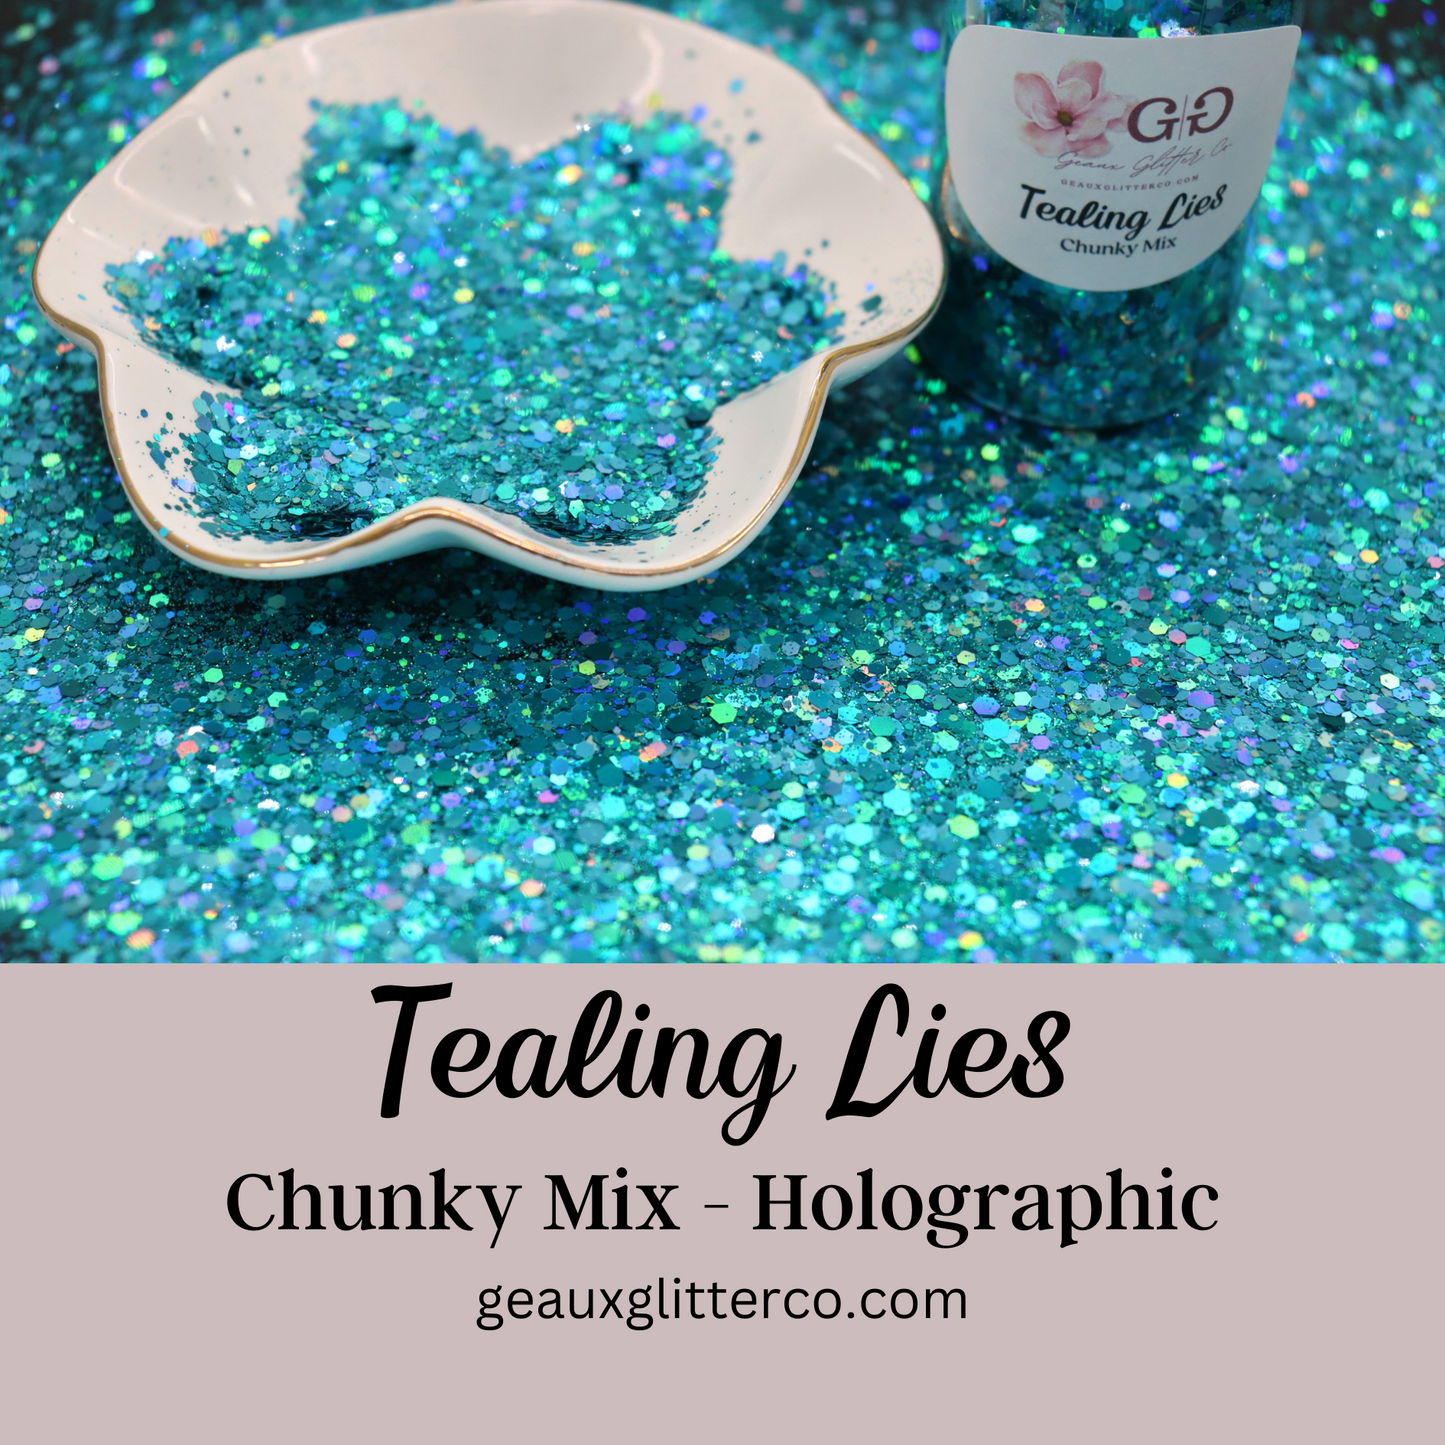 Tealing Lies Chunky Mix - Holographic